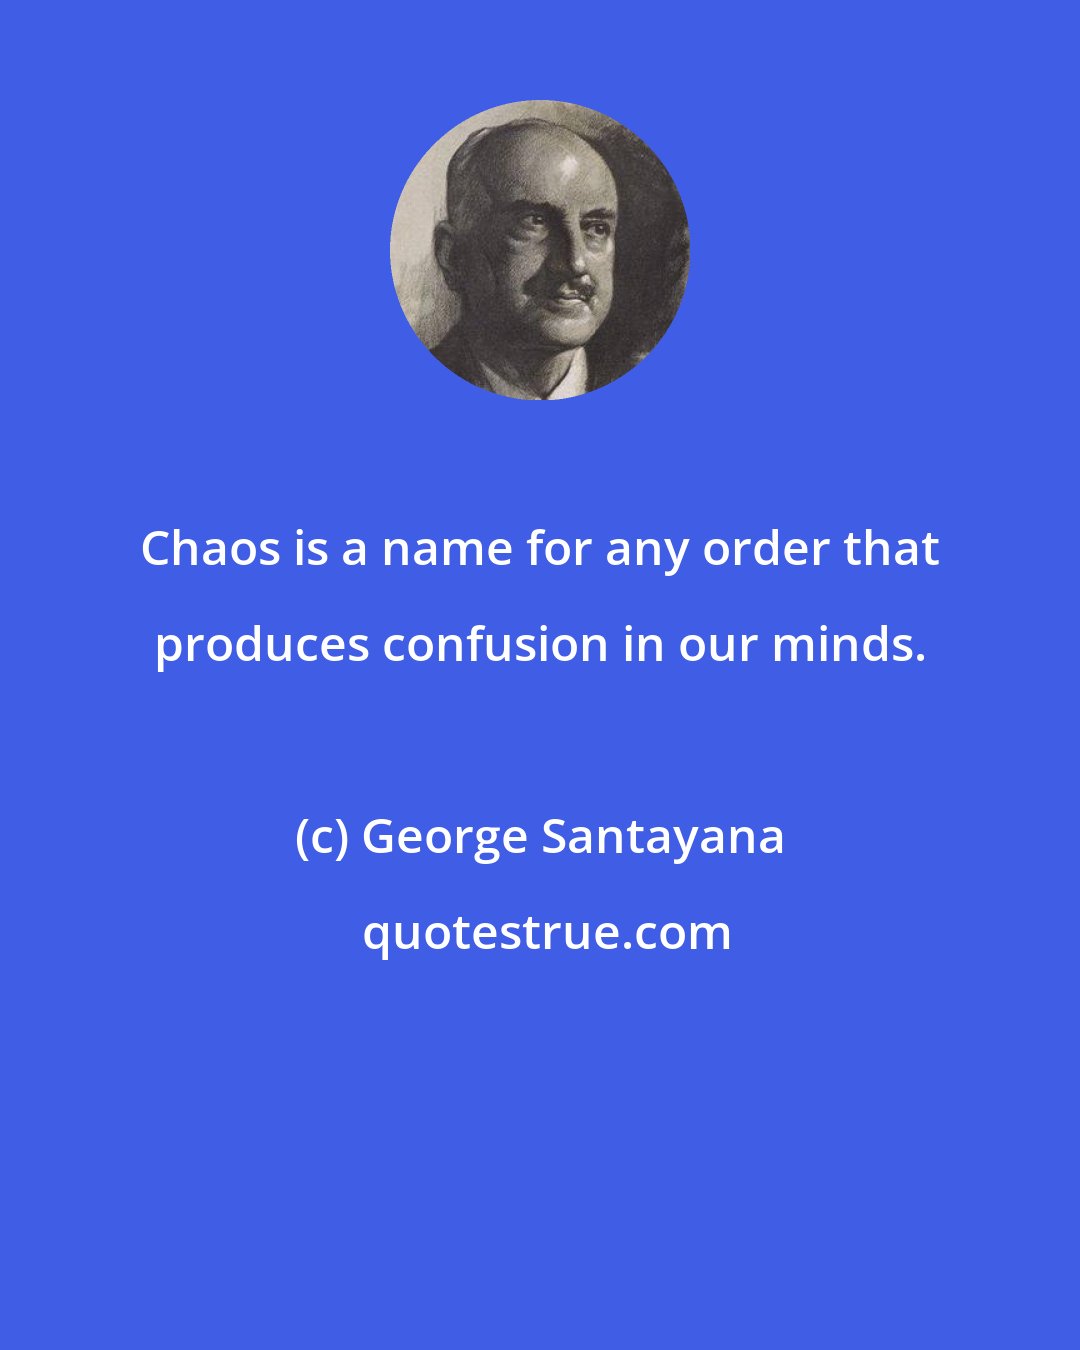 George Santayana: Chaos is a name for any order that produces confusion in our minds.